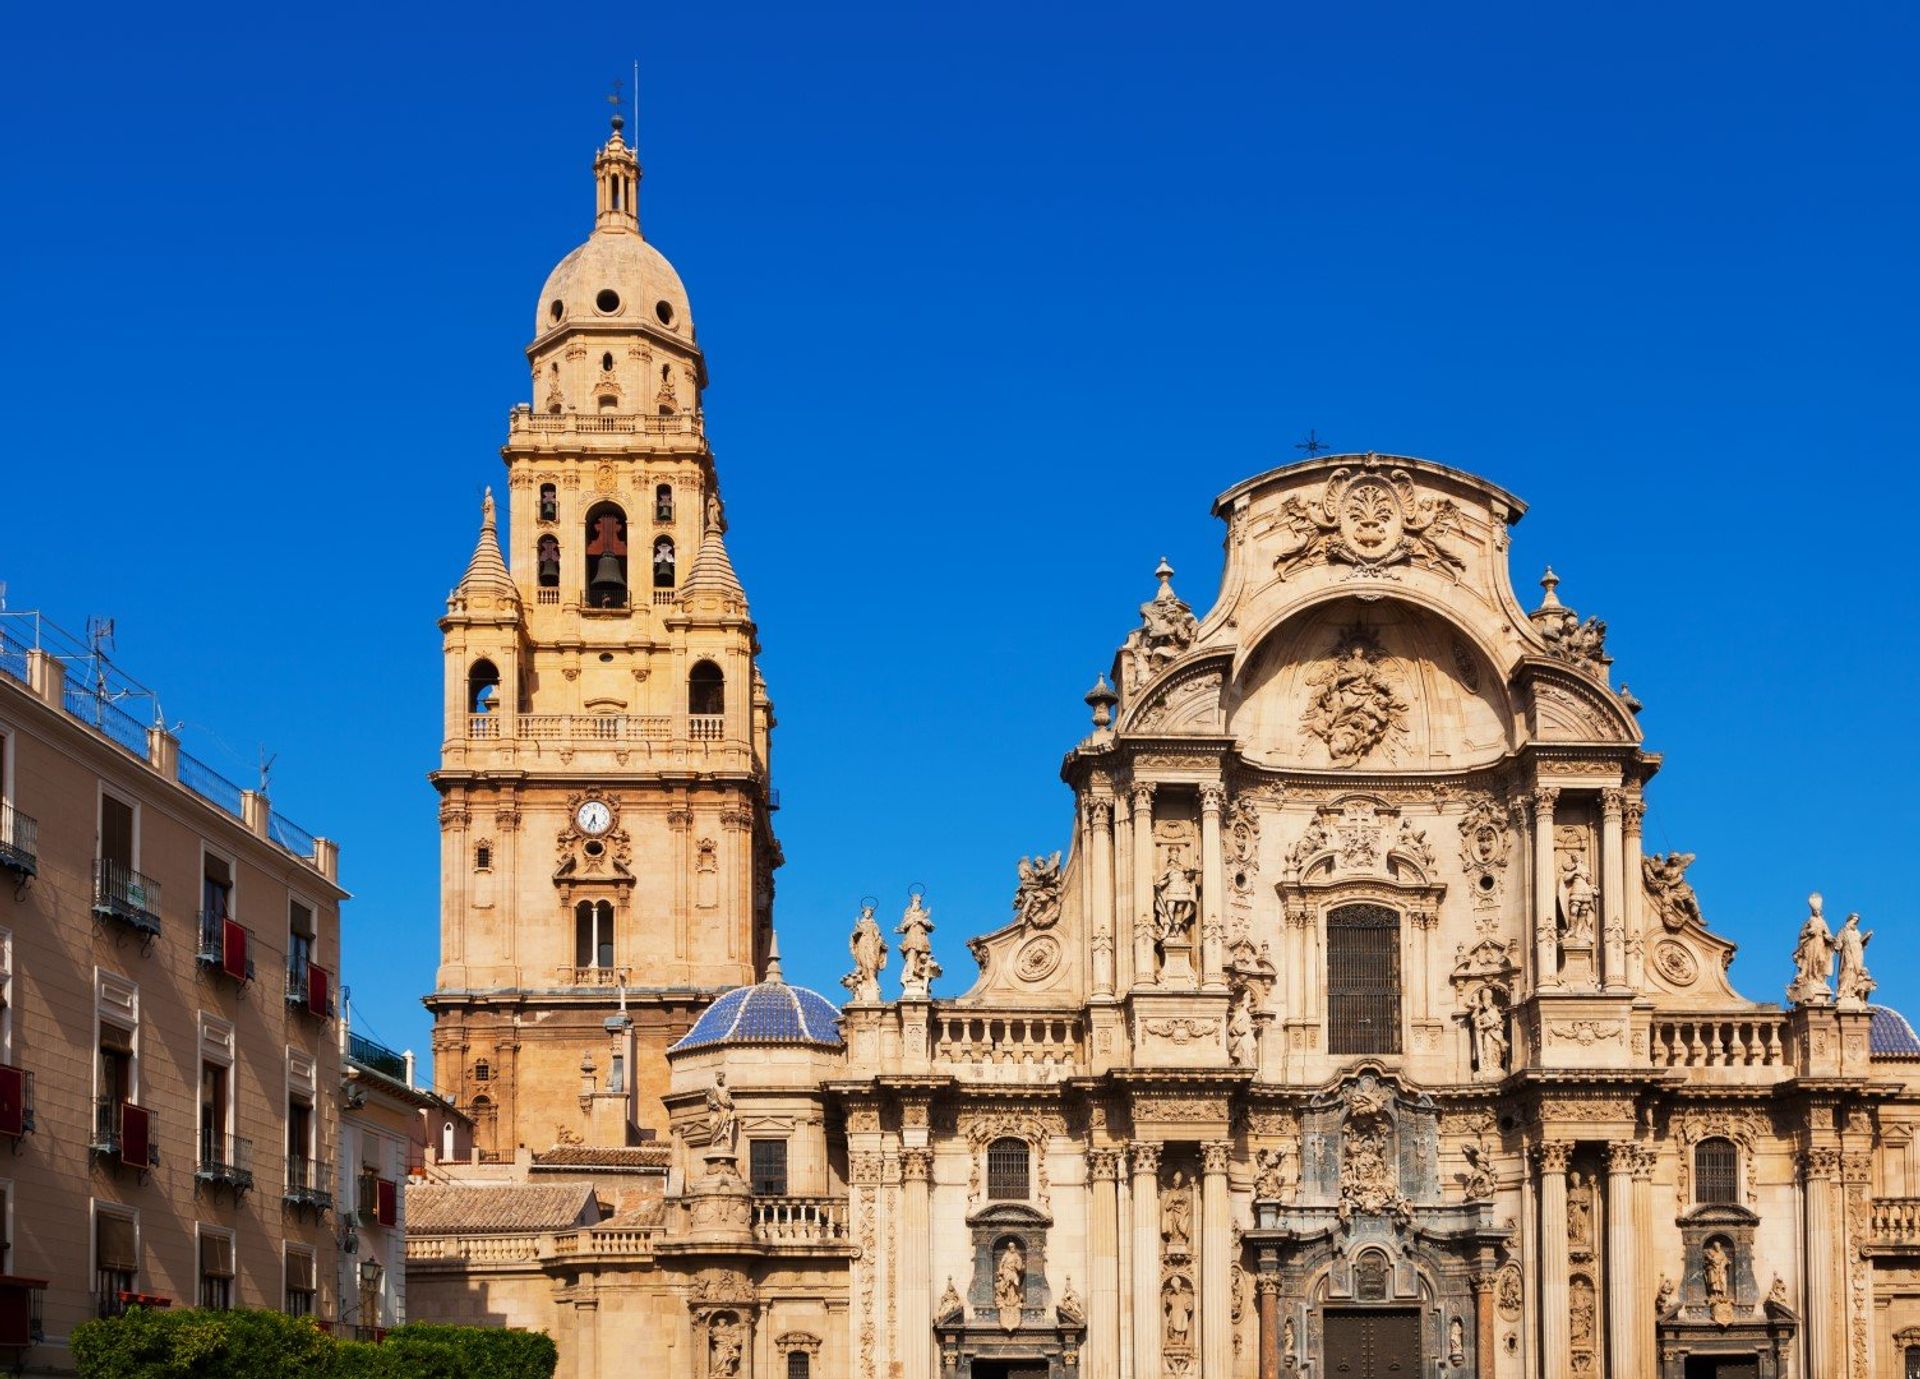 The capital of Murcia is renowned for its stunning 18th century Cathedral